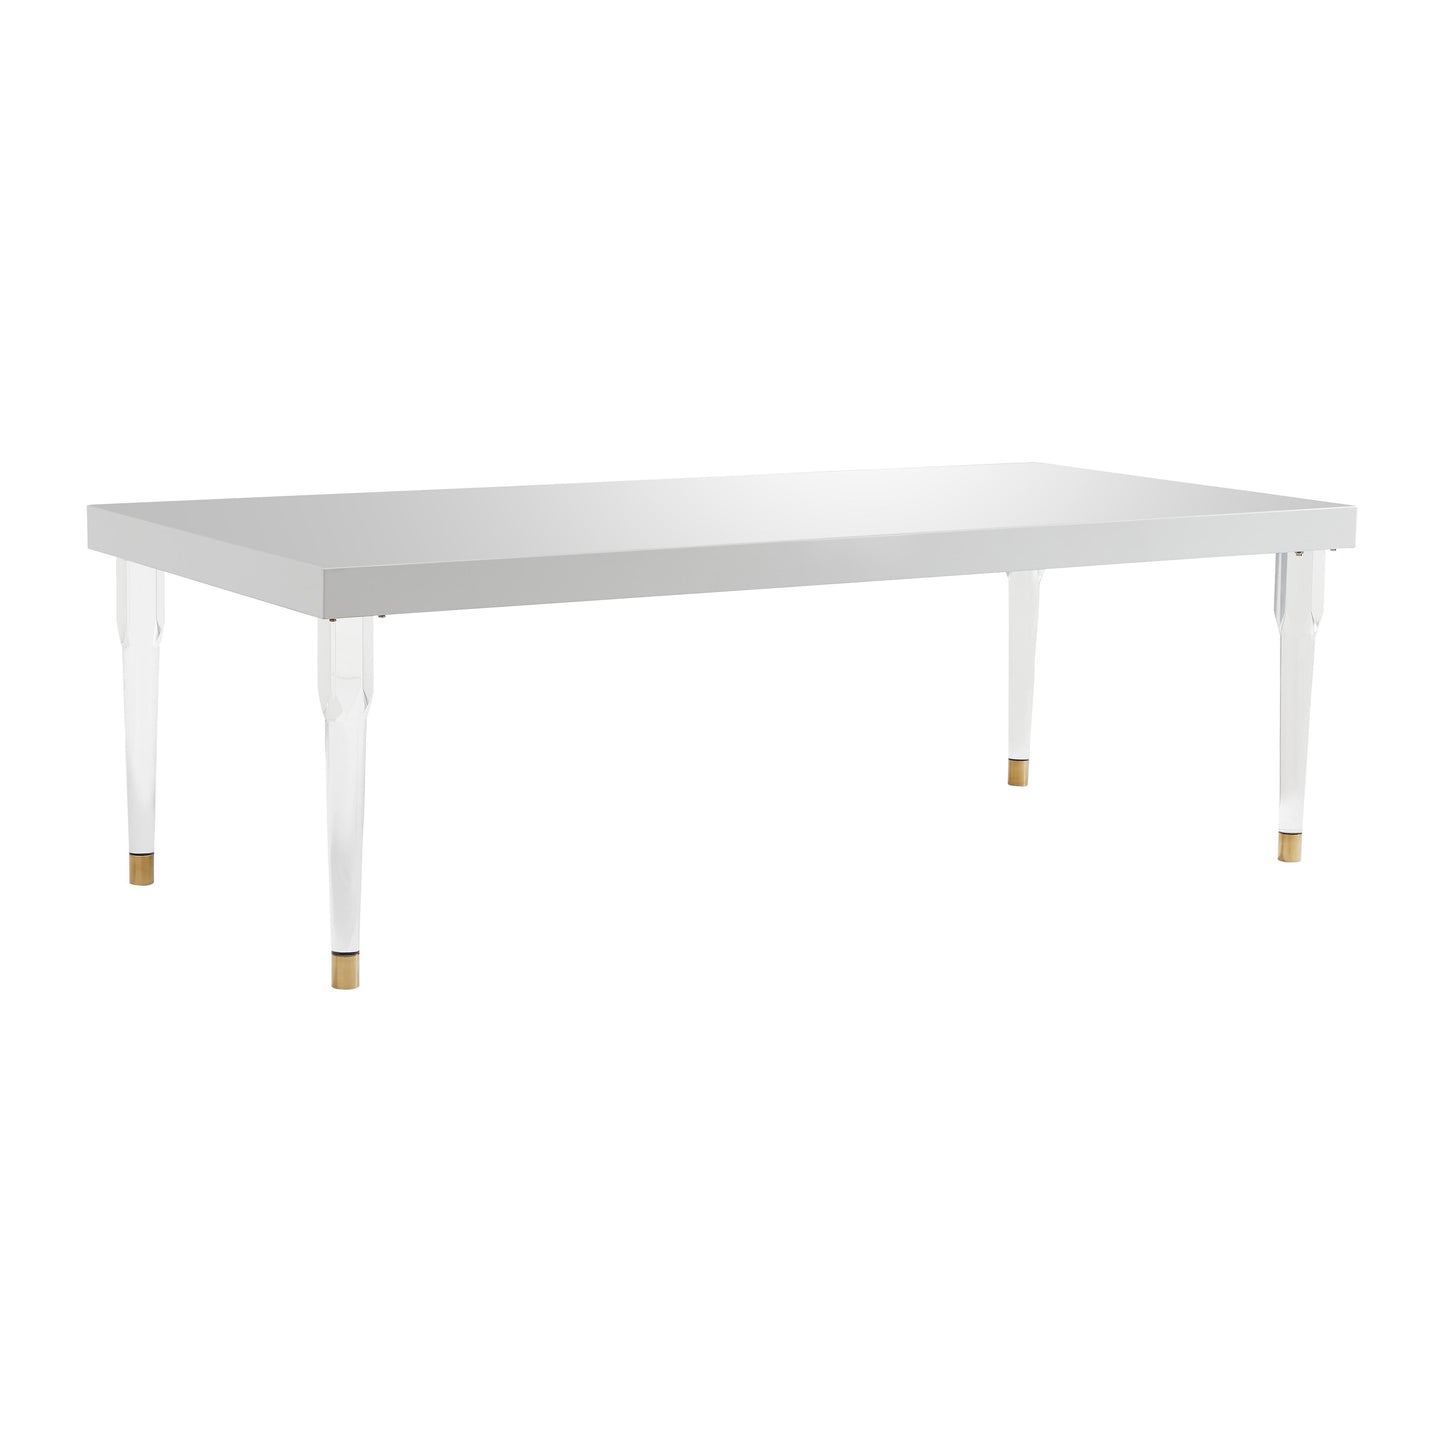 Tabby Glossy Lacquer Dining Table by TOV